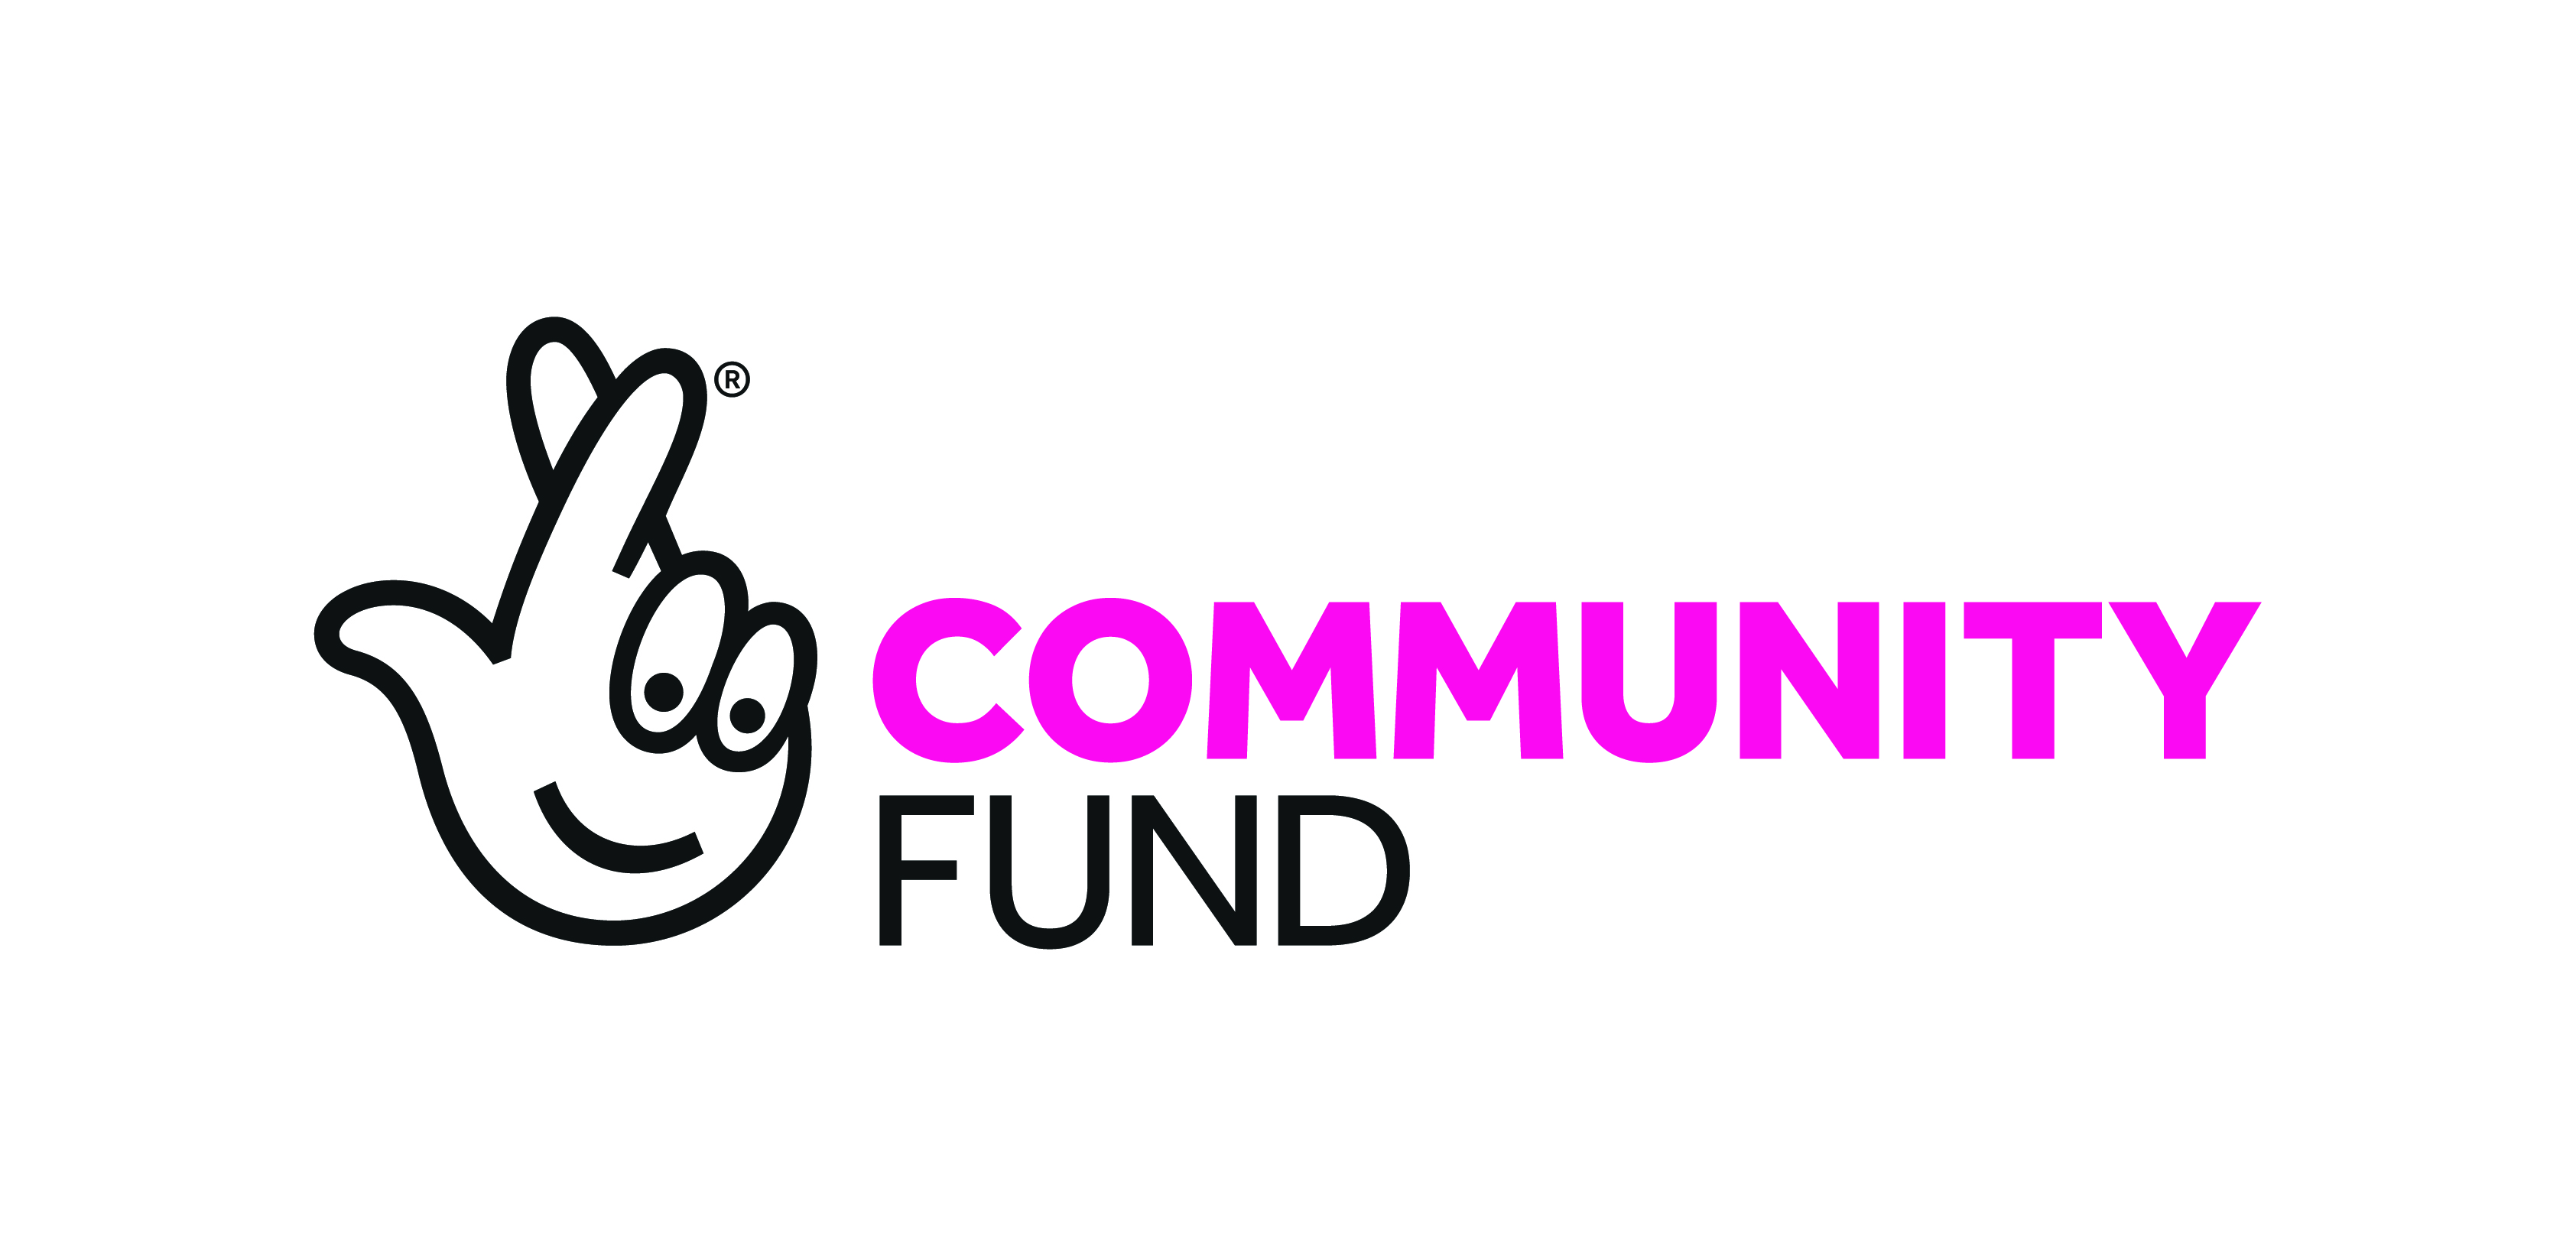 National Lottery Community Fund logo - White background - image of fingers crossed and the working community fund